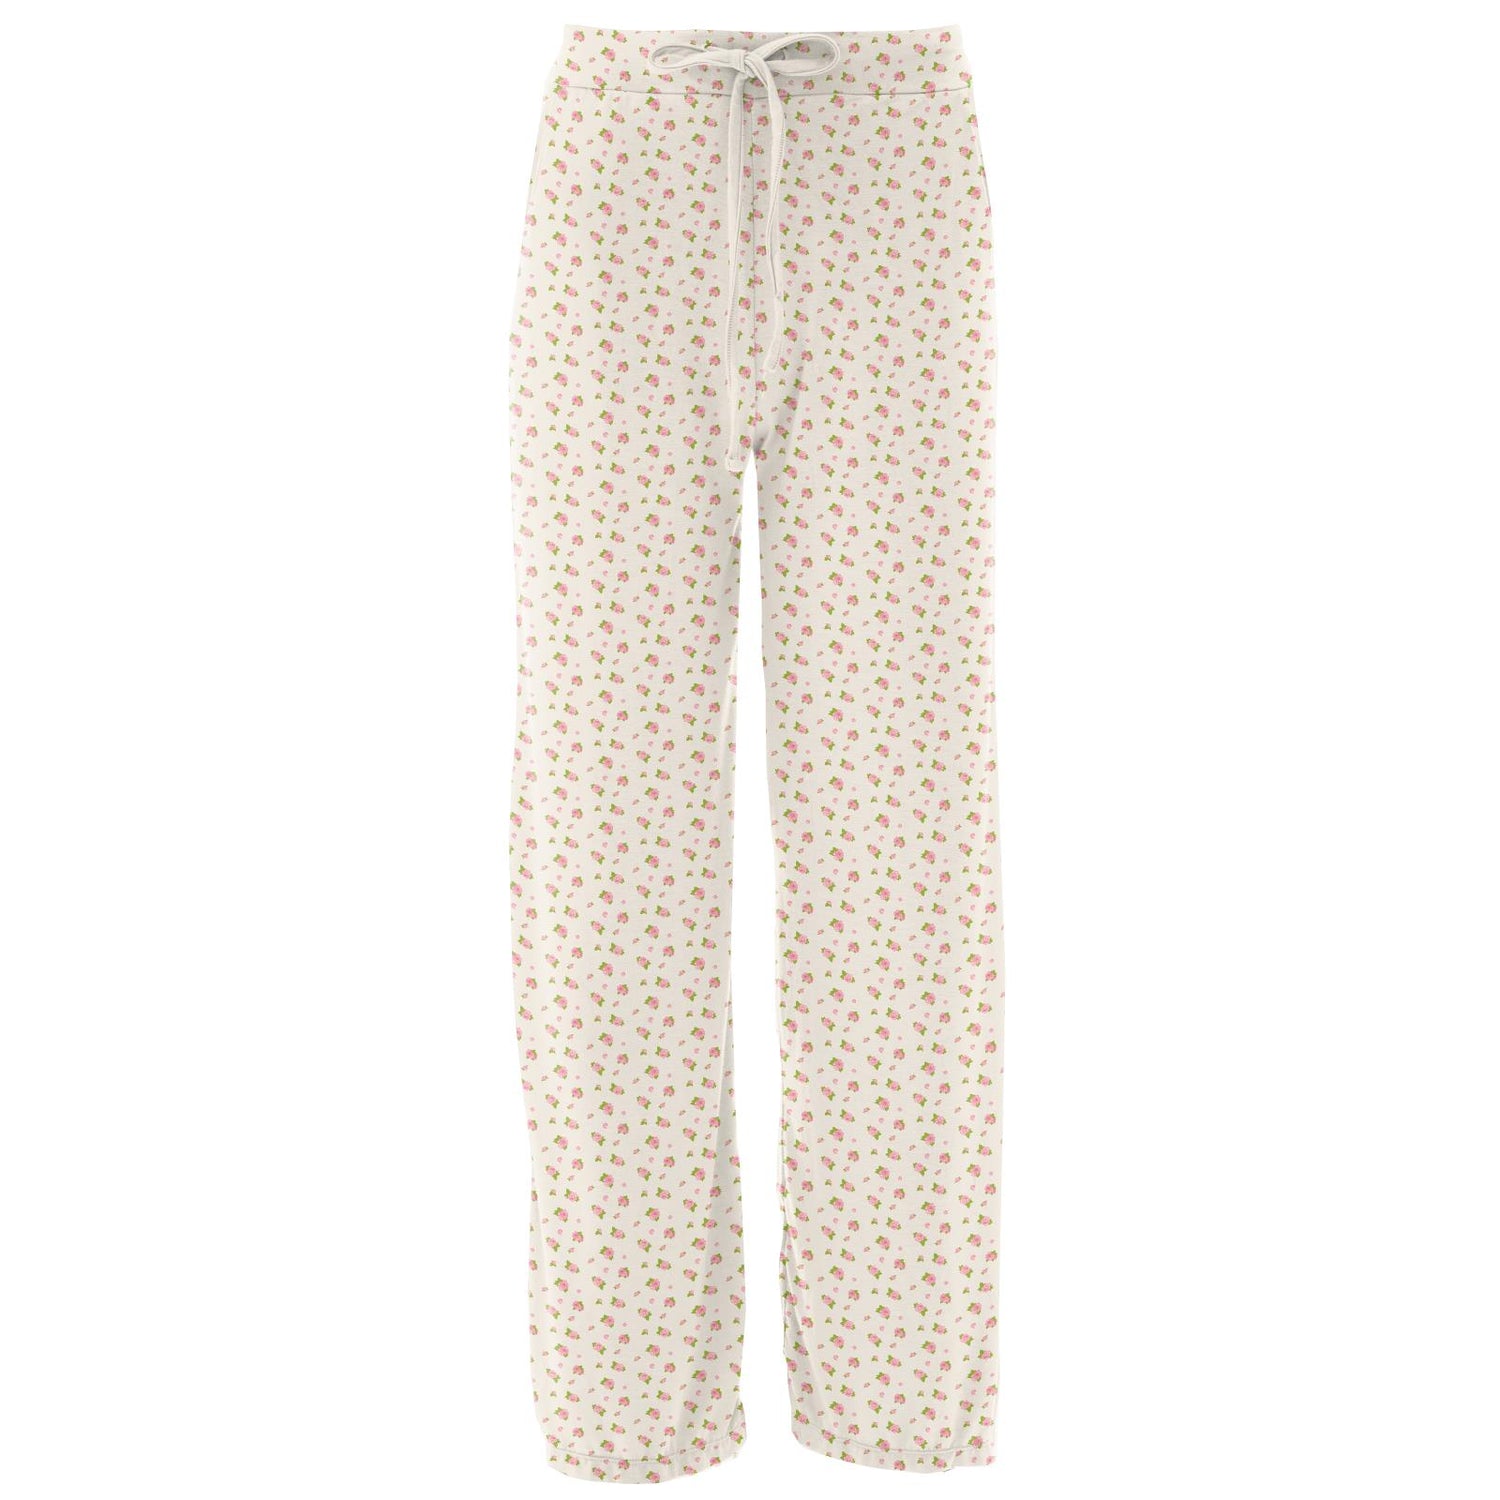 Women's Print Lounge Pants in Natural Buds